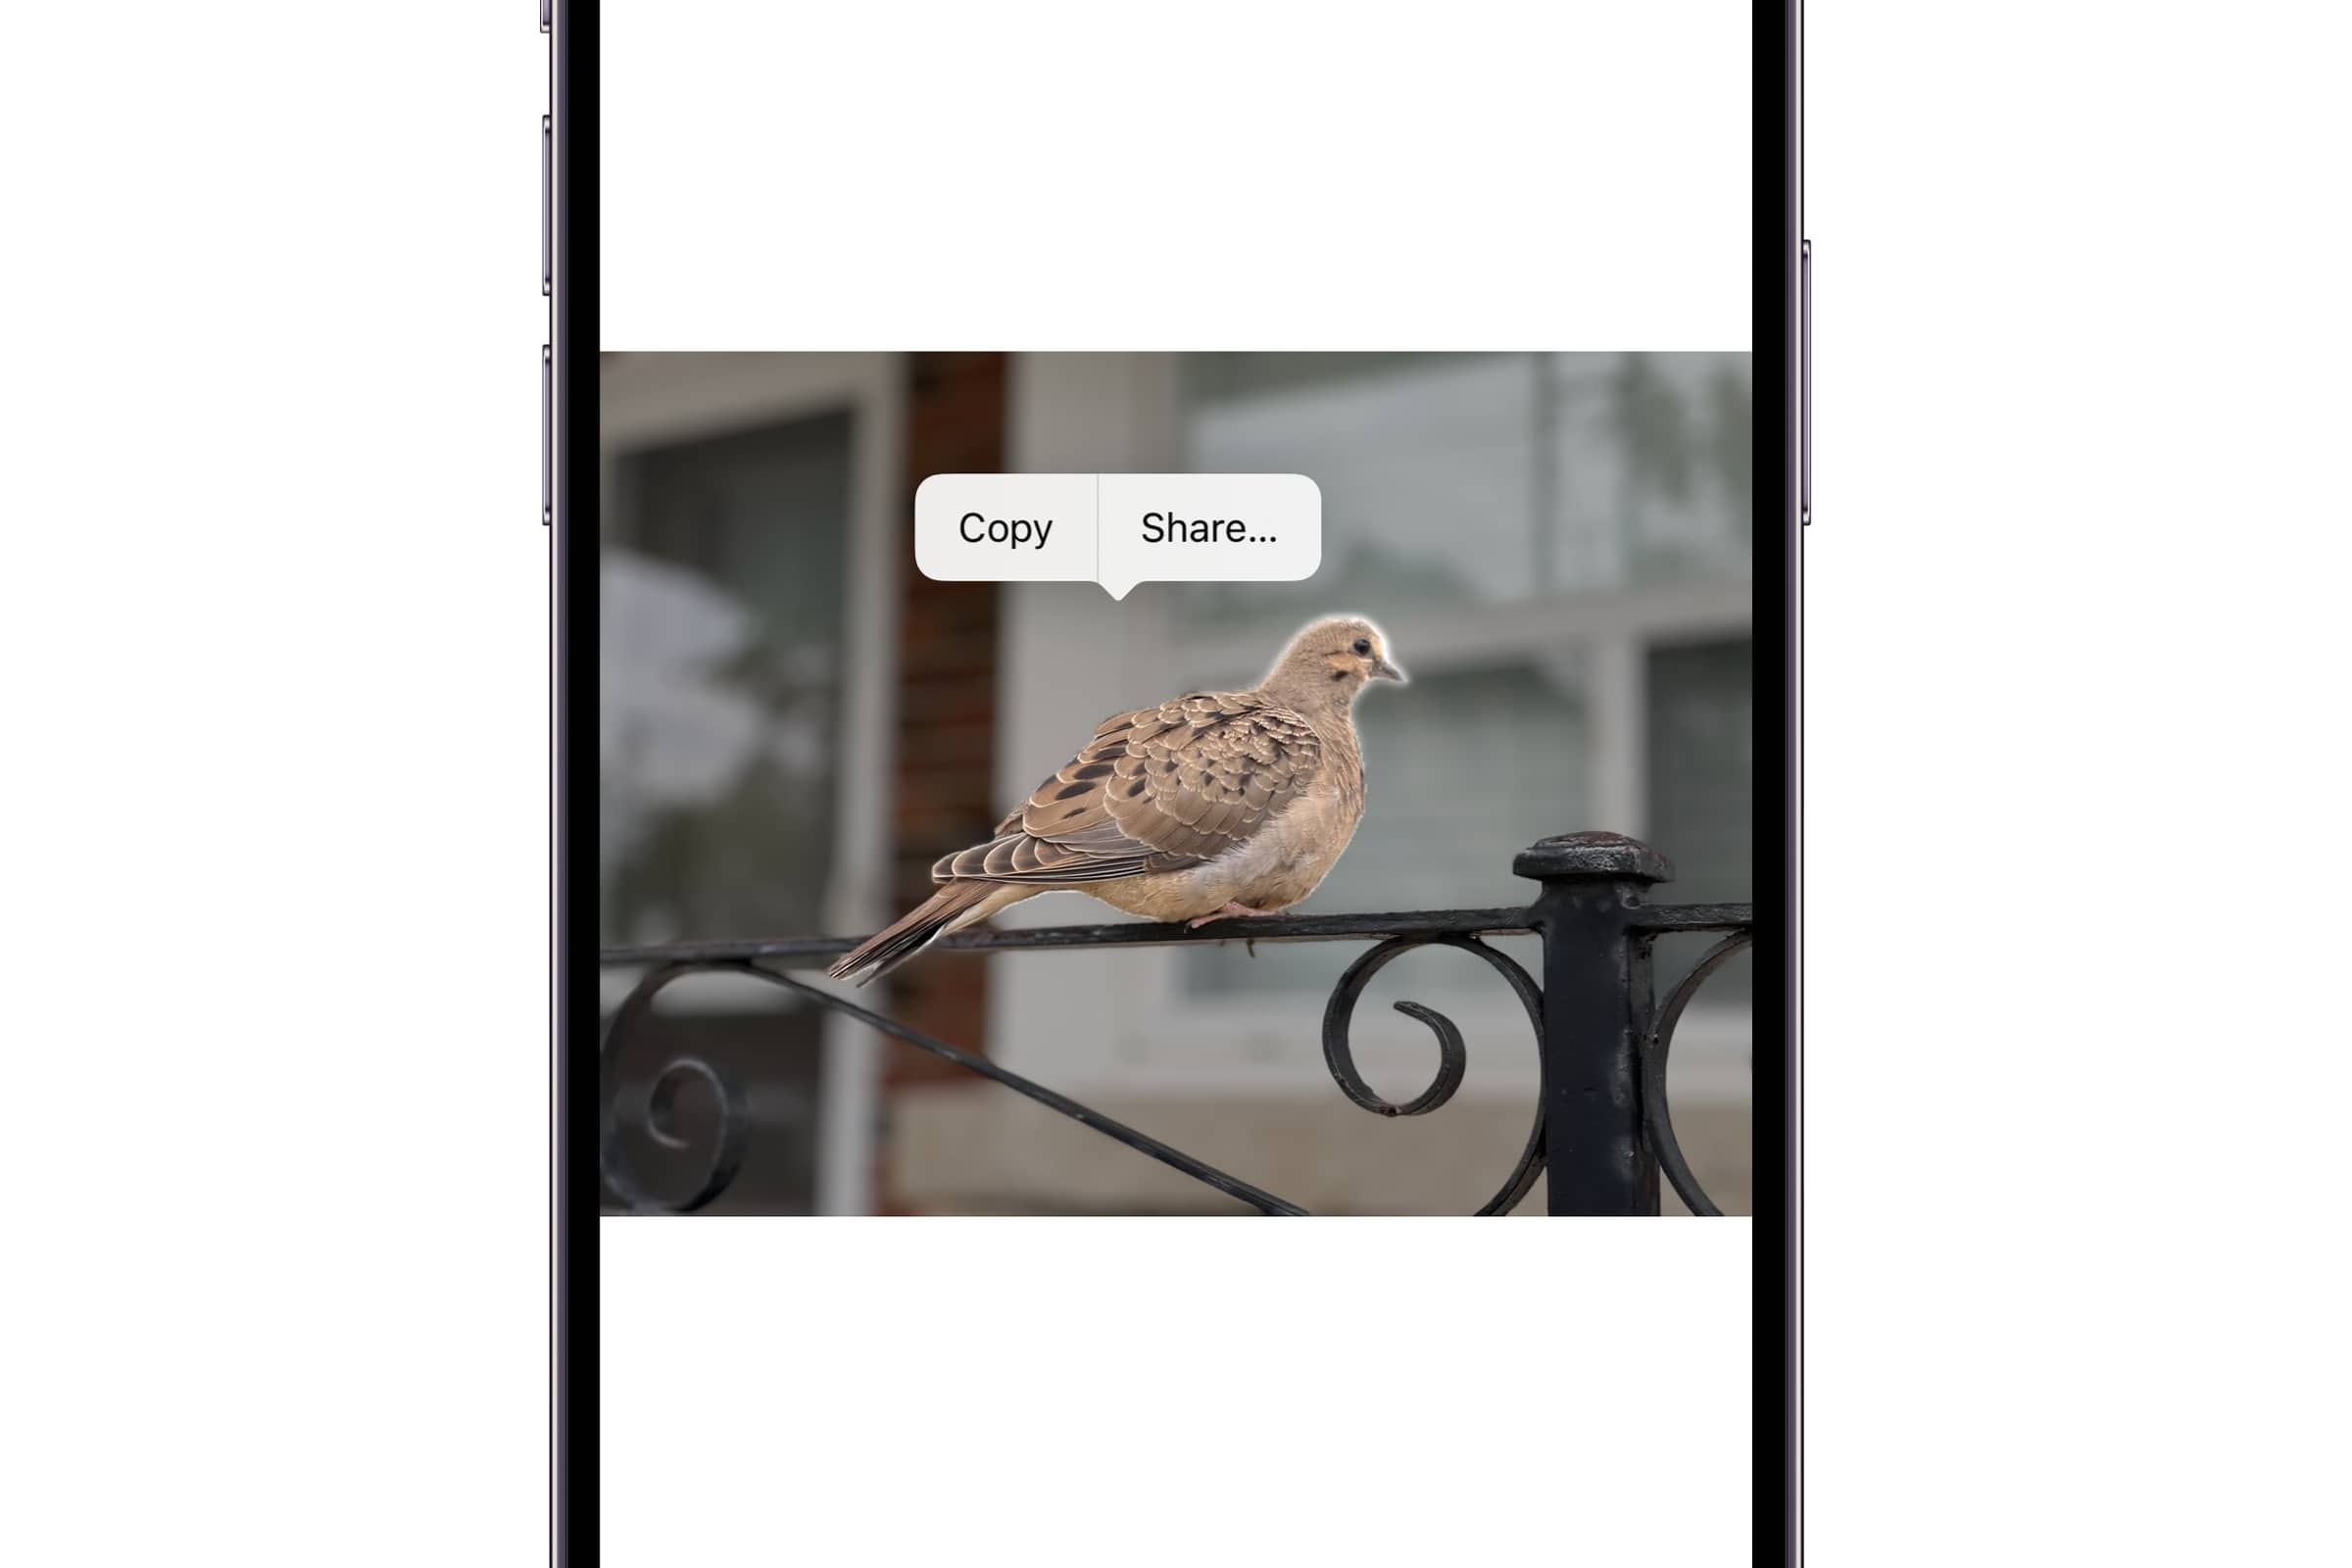 iPhone shows a photo of a bird with a context menu to copy or share the subject.